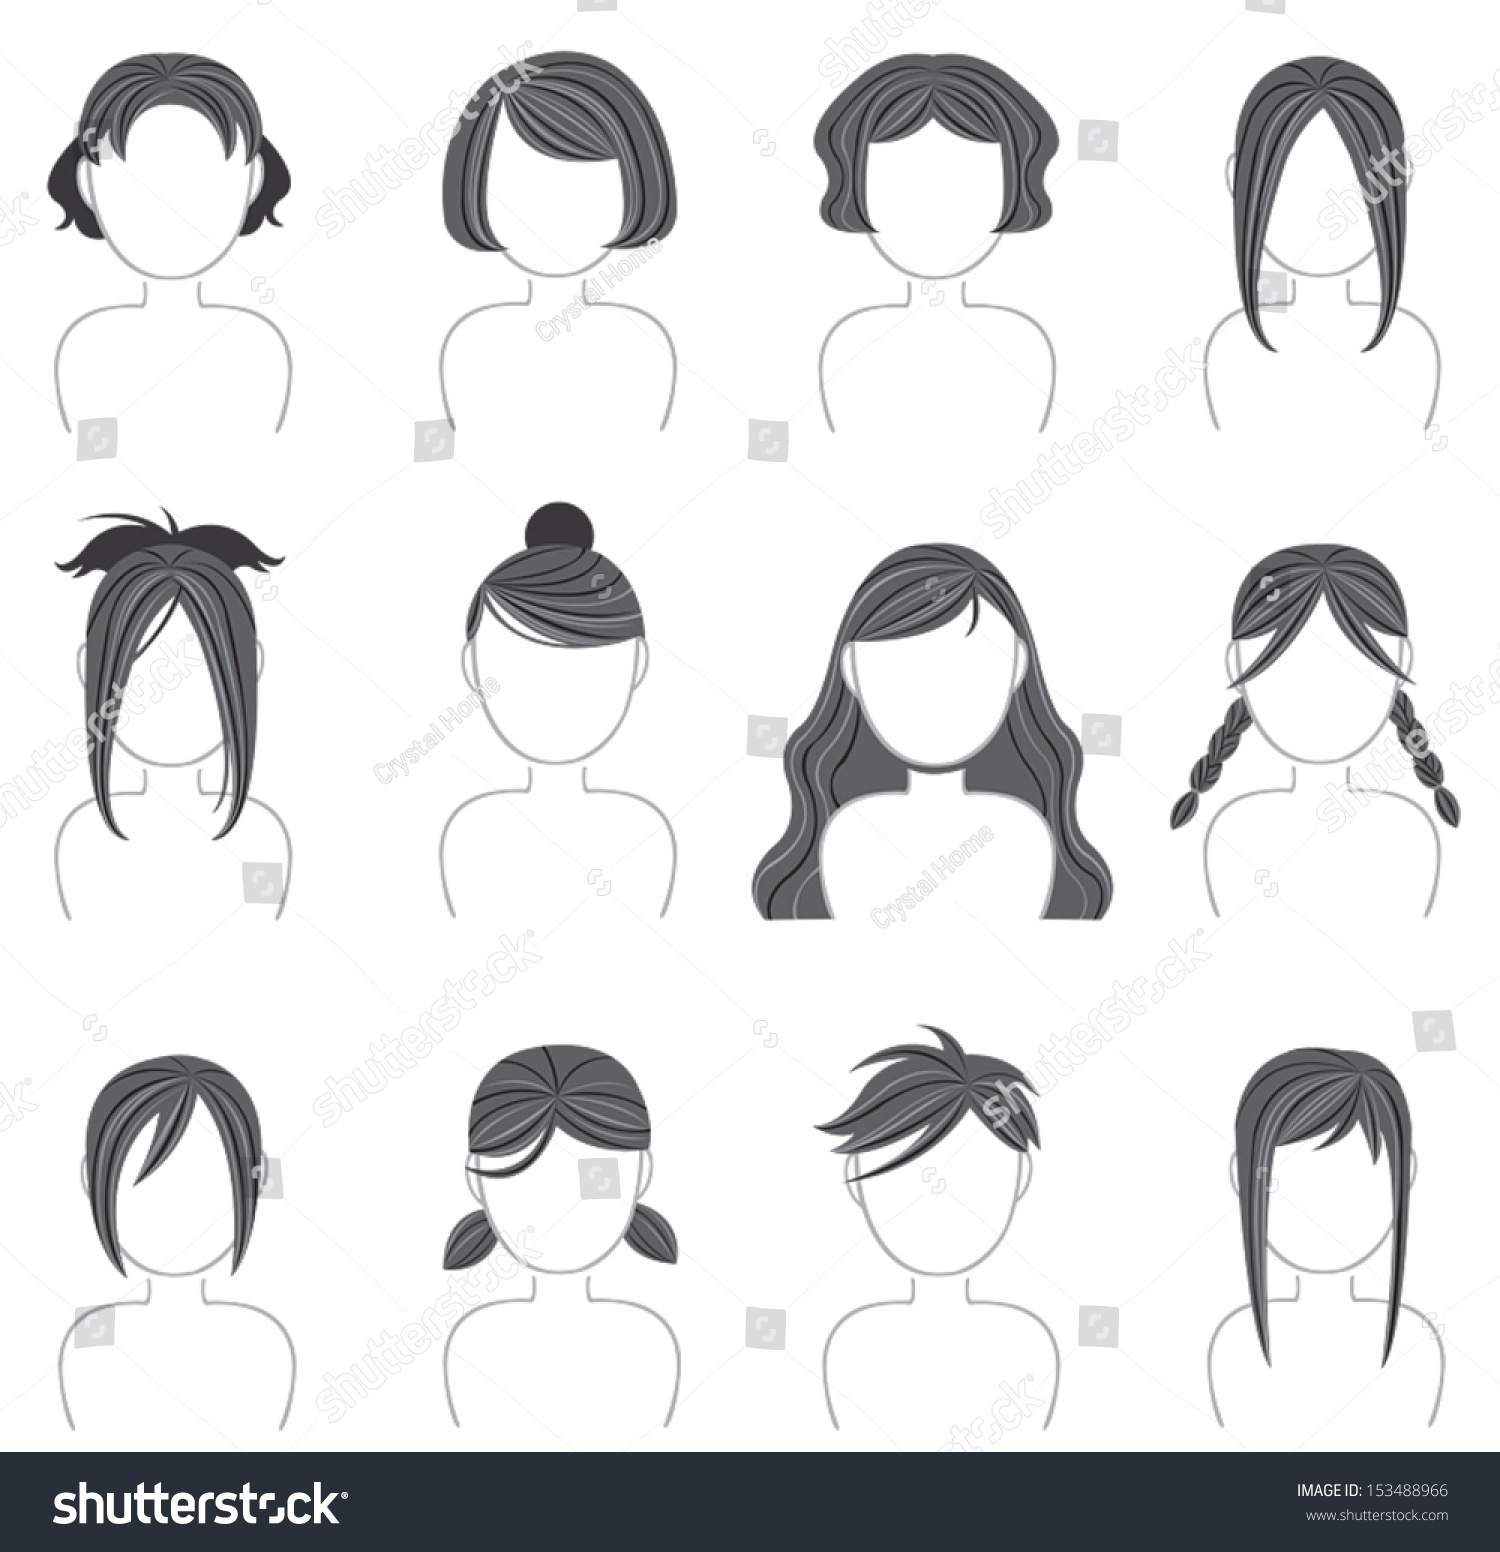 hairstyles clip art free - photo #46